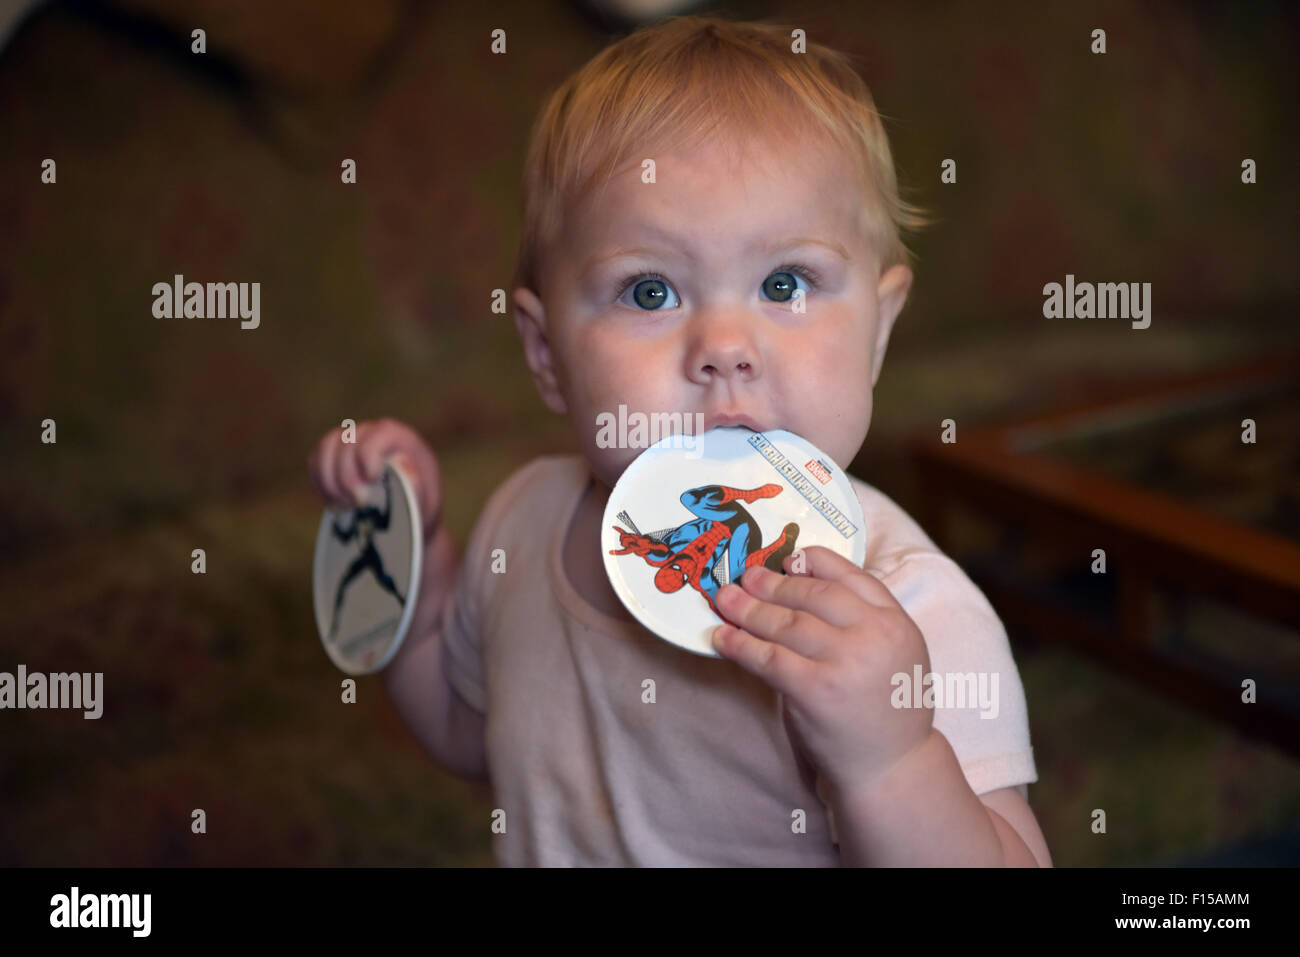 An eleven month old baby chewing on a plastic coaster to alleviate the pain and discomfort of tooth ache. Stock Photo